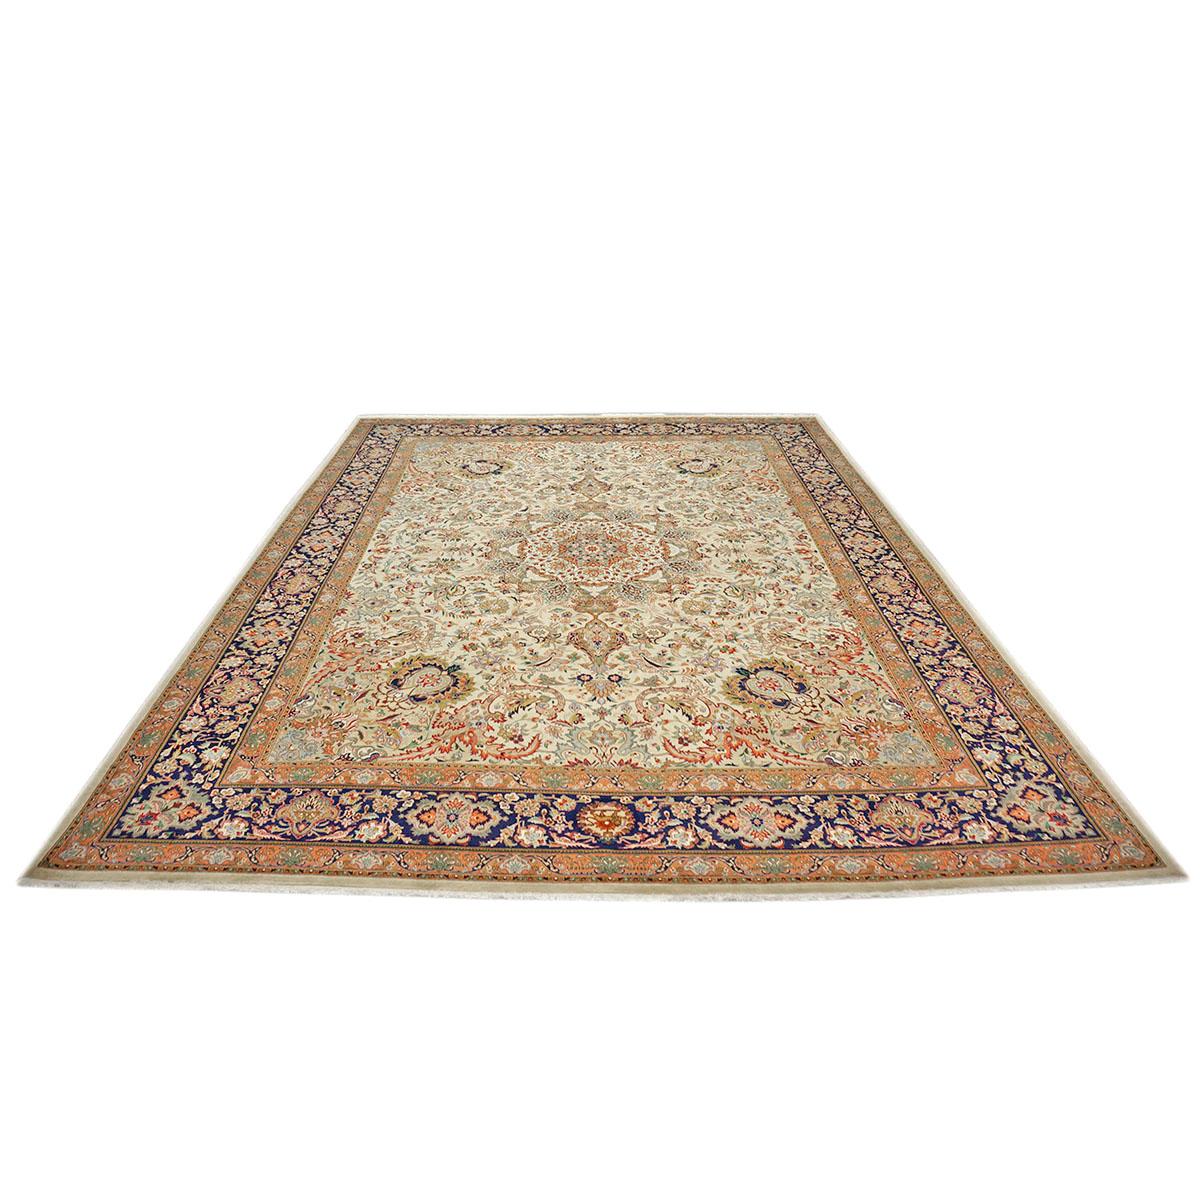 Ashly Fine Rugs presents a 1930s Antique Persian Tabriz. Tabriz is a northern city in modern-day Iran and has forever been famous for the fineness and craftsmanship of its handmade rugs. This piece has an ivory-colored background with design,